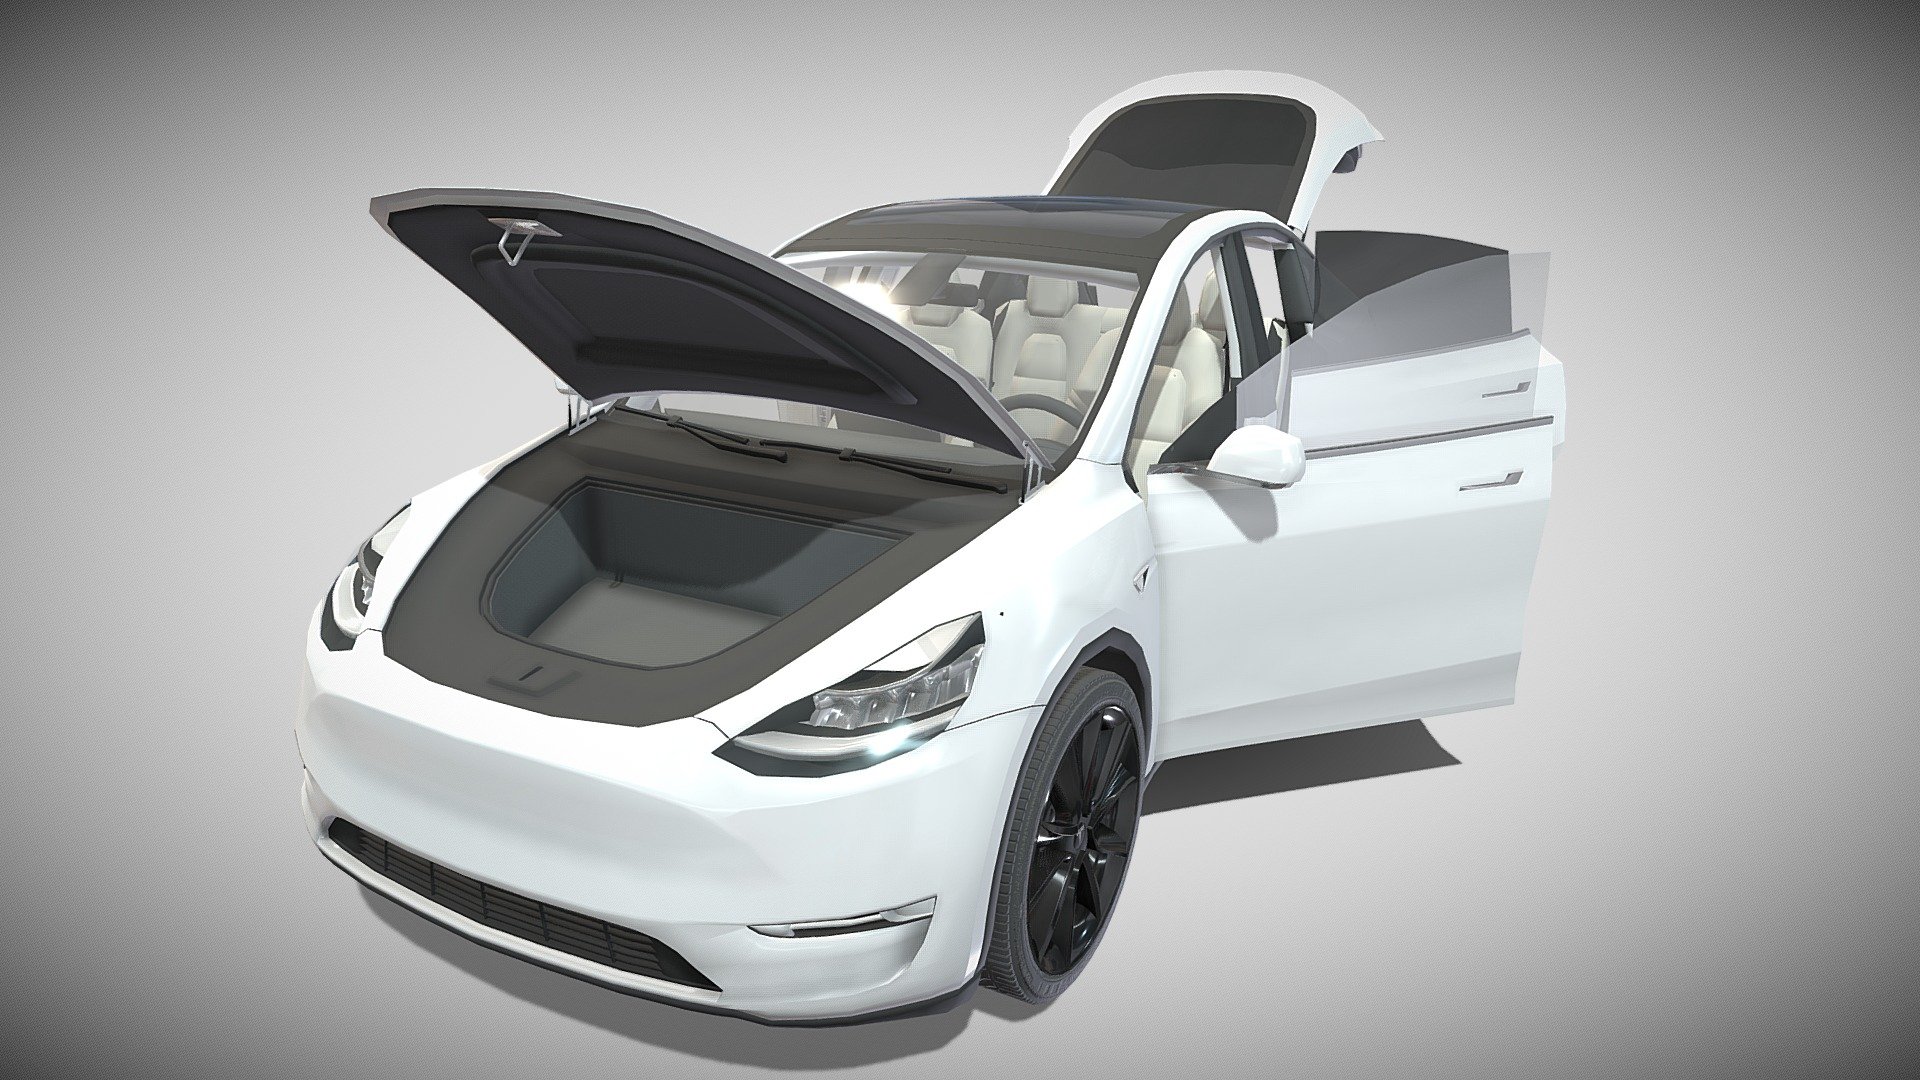 Tesla Model Y RWD with full chassis (battery pack, rear motor setup, brakes, linkages, suspension, steering) and a detailed interior 3d model rendered with Cycles in Blender, as per seen on attached images.

File formats:
-.blend, rendered with cycles, as seen in the images;
-.blend, open, rendered with cycles, as seen in the images;
-.blend, rendered with cycles, with a see-through of the chassis, as seen in the images;
-.blend, open, rendered with cycles, with a see-through of the chassis, as seen in the images;
-.obj, with materials applied;
-.obj, open, with materials applied;
-.dae, with materials applied;
-.dae, open, with materials applied;
-.fbx, with material slots applied;
-.fbx, open, with material slots applied;
-.stl;
-.stl, open;

Files come named appropriately and split by file format.

3D Software:
The 3D model was originally created in Blender 2.79 and rendered with Cycles.

Materials and textures:
The models have materials applied in all formats, and are ready to import and render 3d model